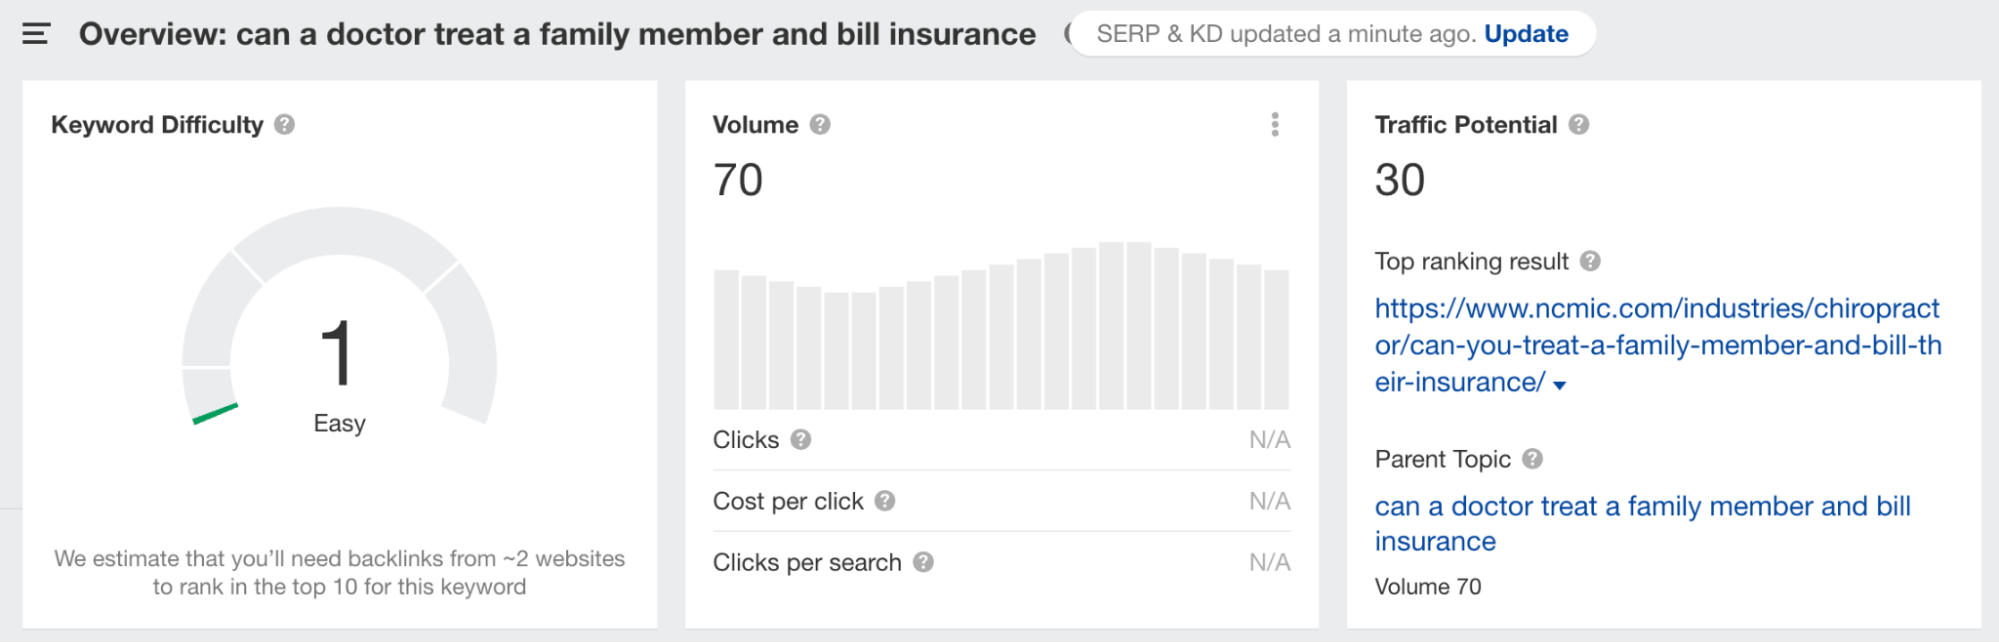 Ahrefs' keyword overview for "can a doctor treat a family member and bill insurance"